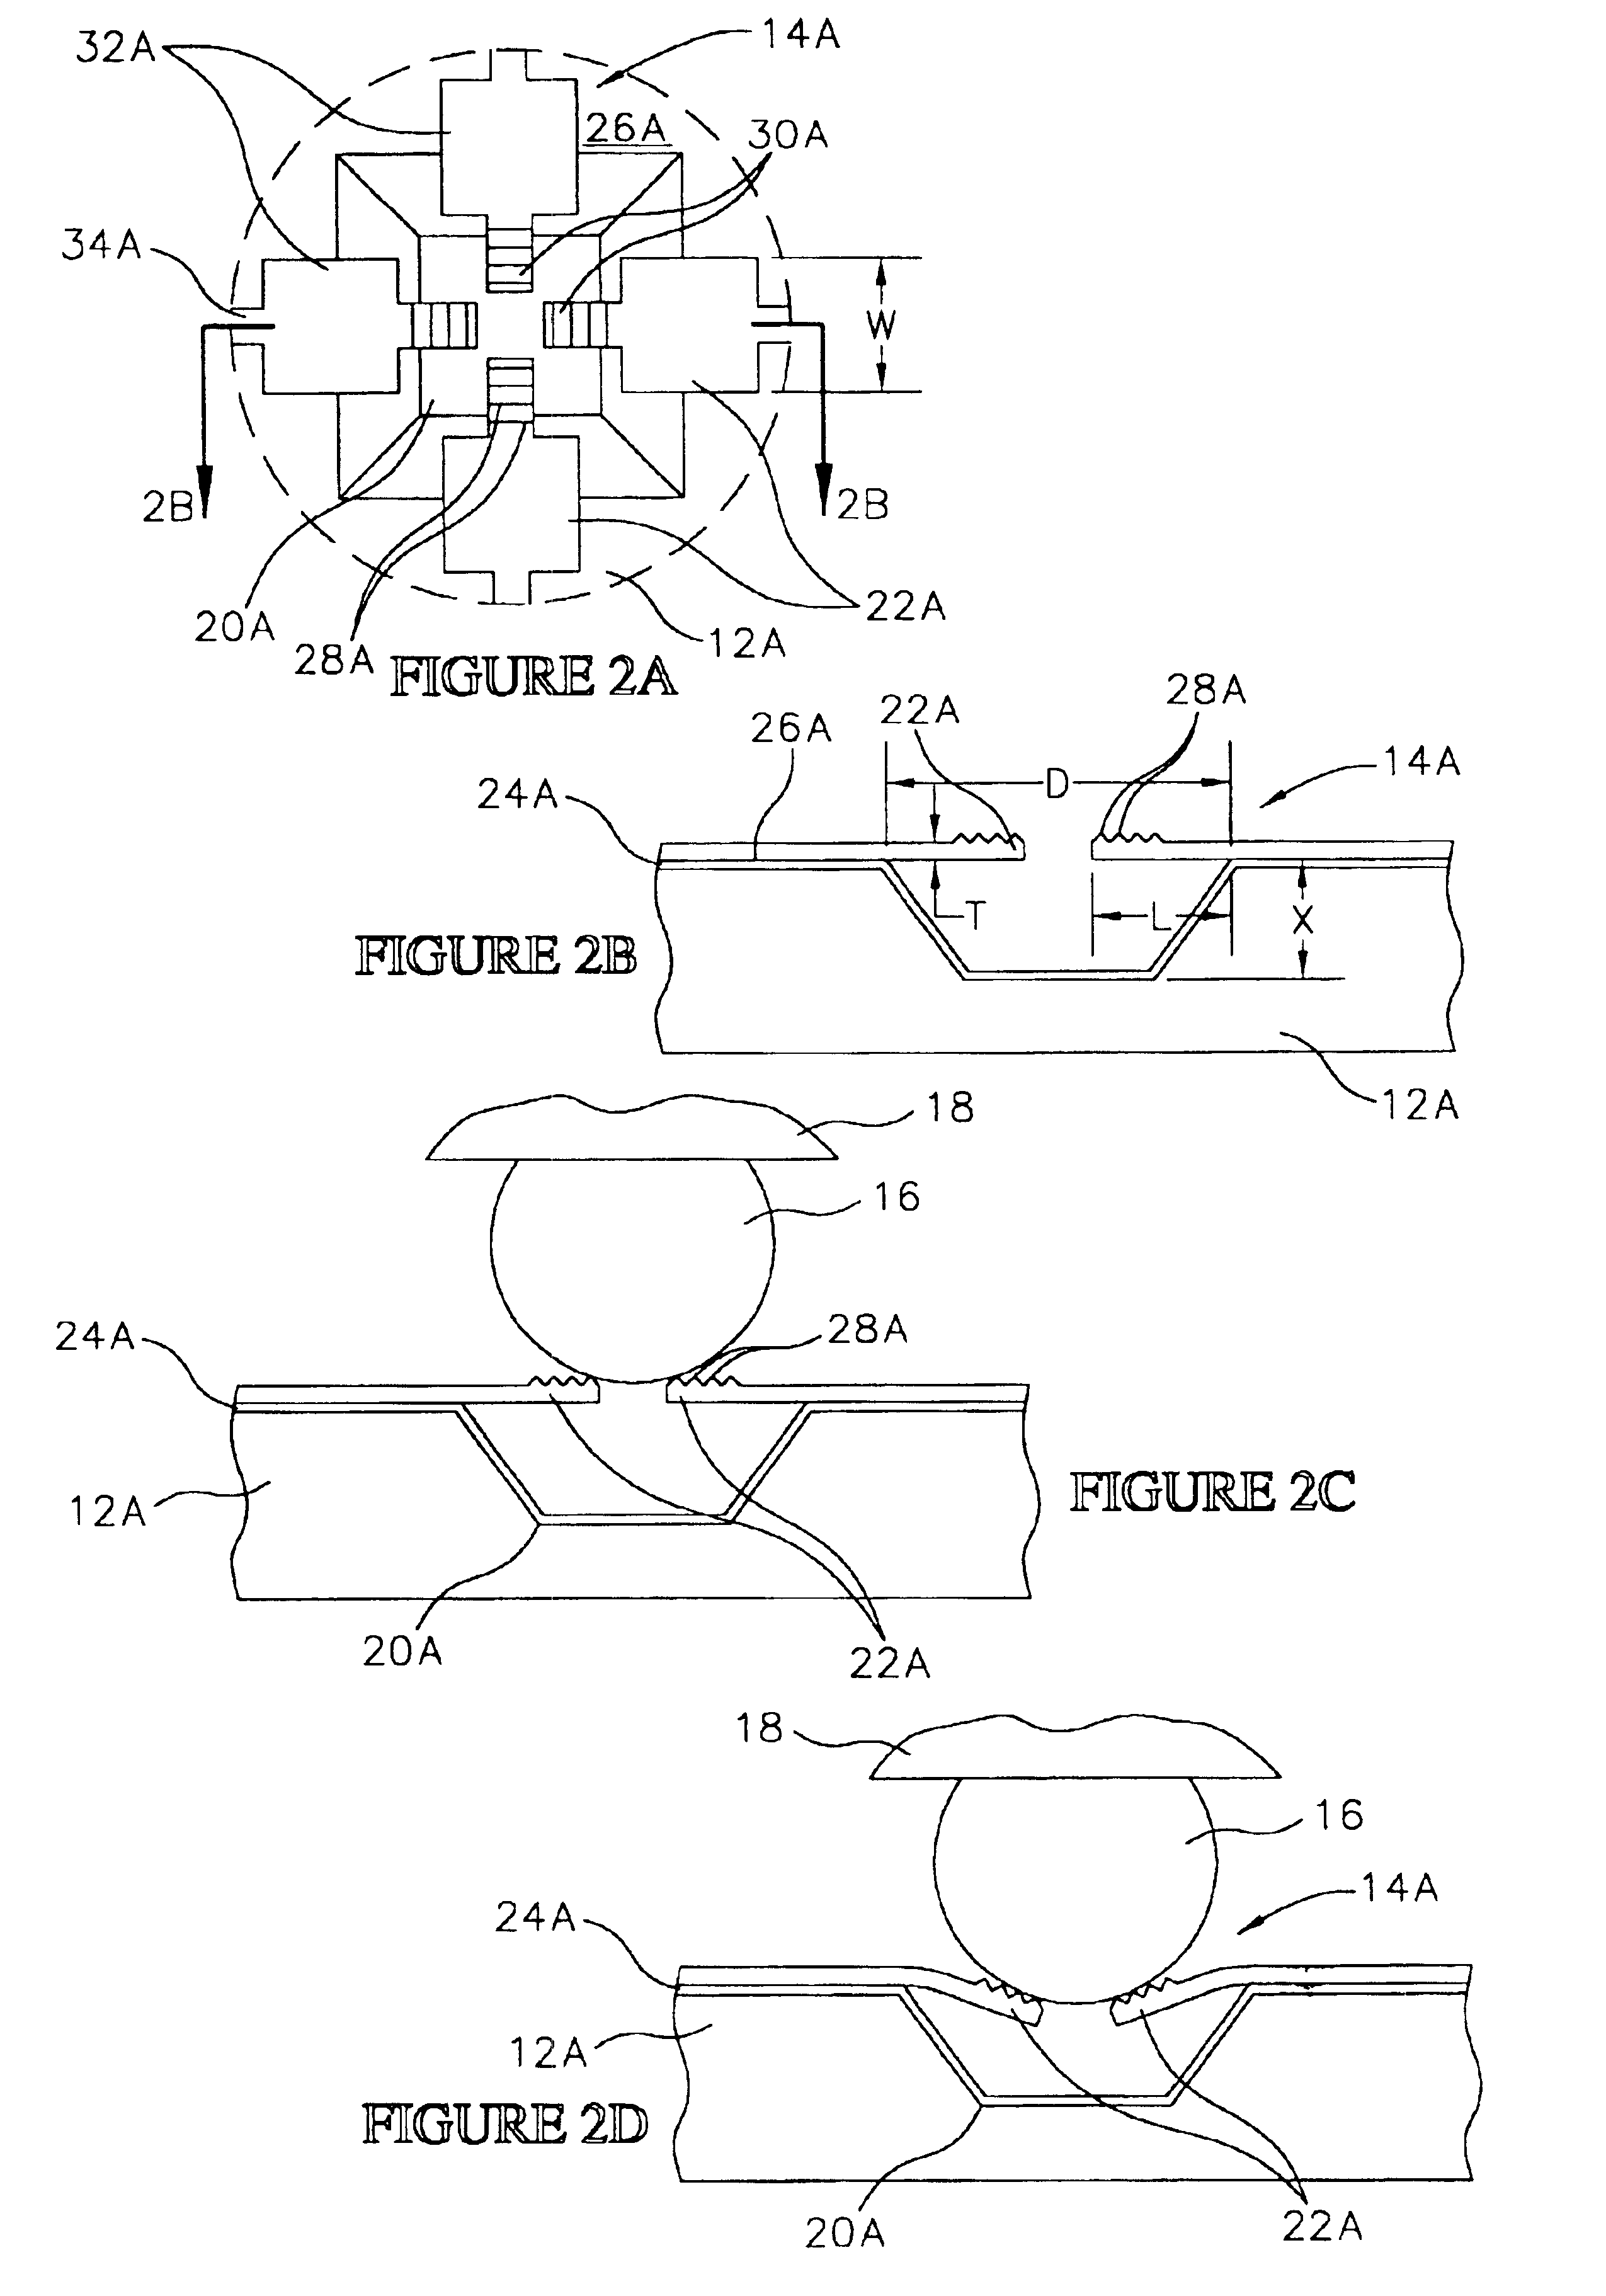 Test interconnect for bumped semiconductor components and method of fabrication